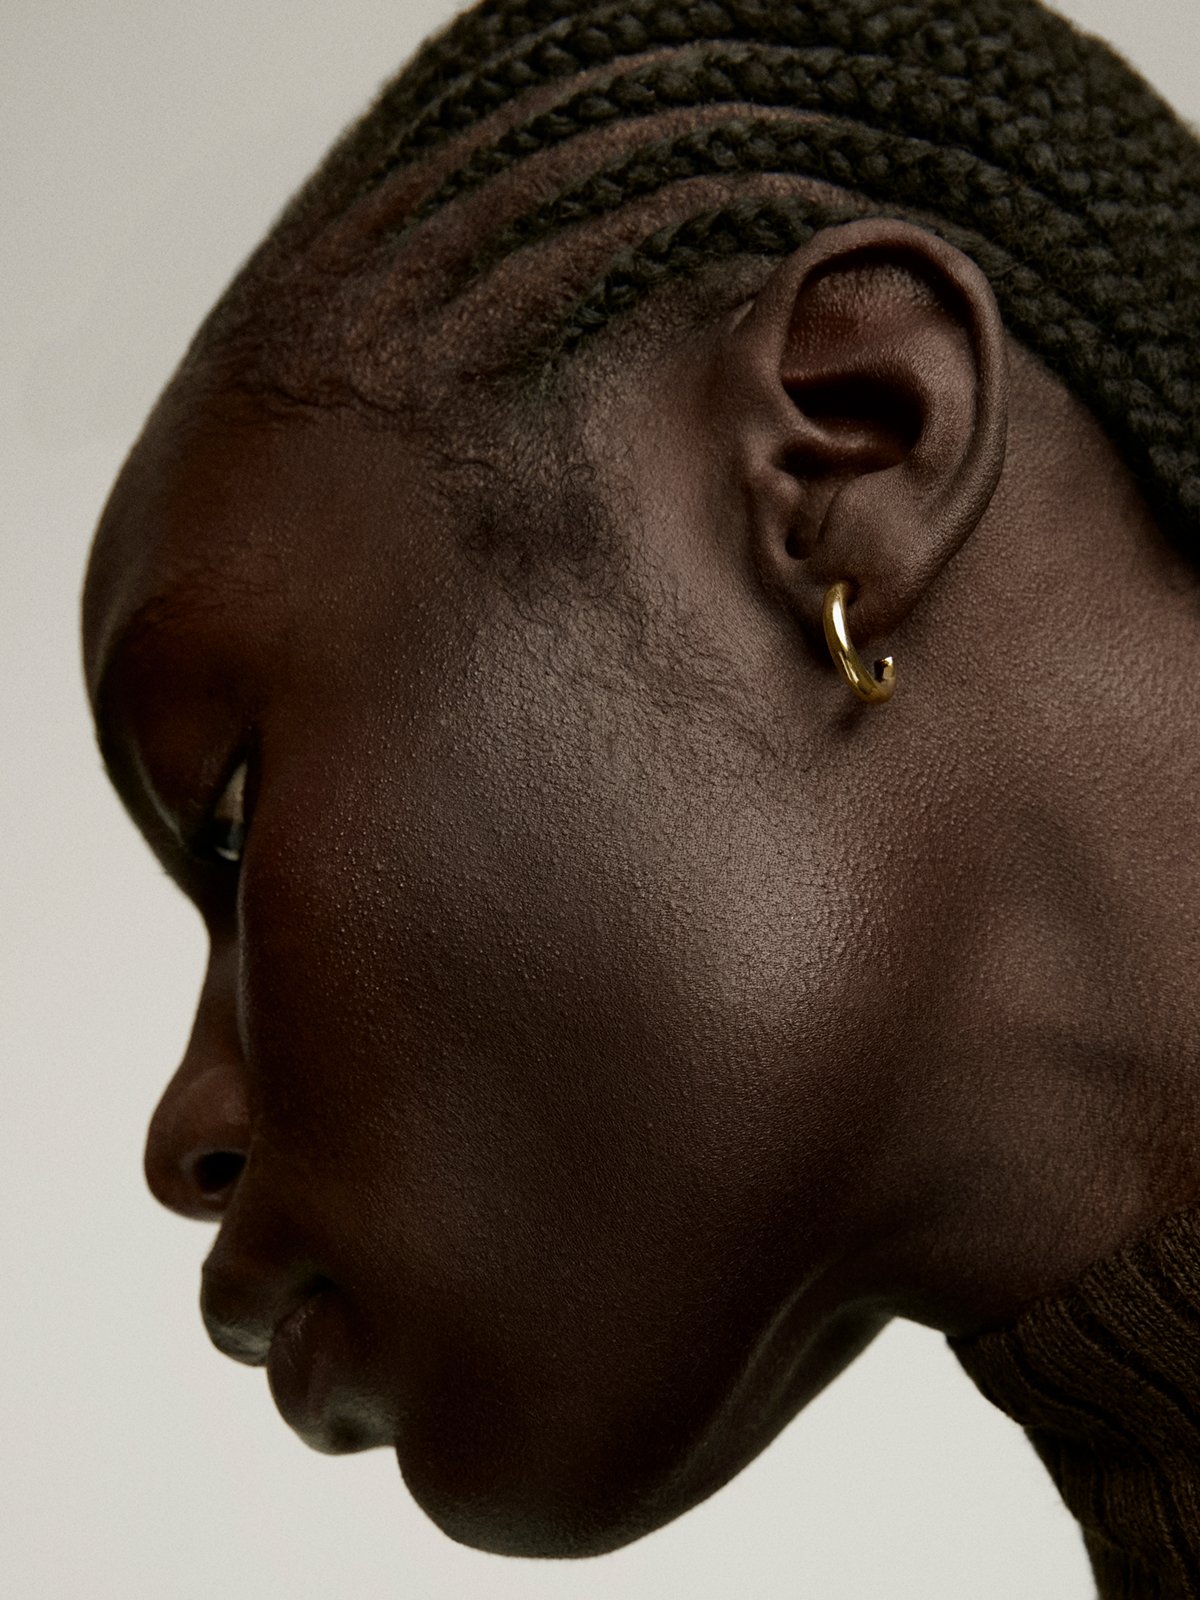 Small hoop earrings made of 925 silver bathed in 18K yellow gold.